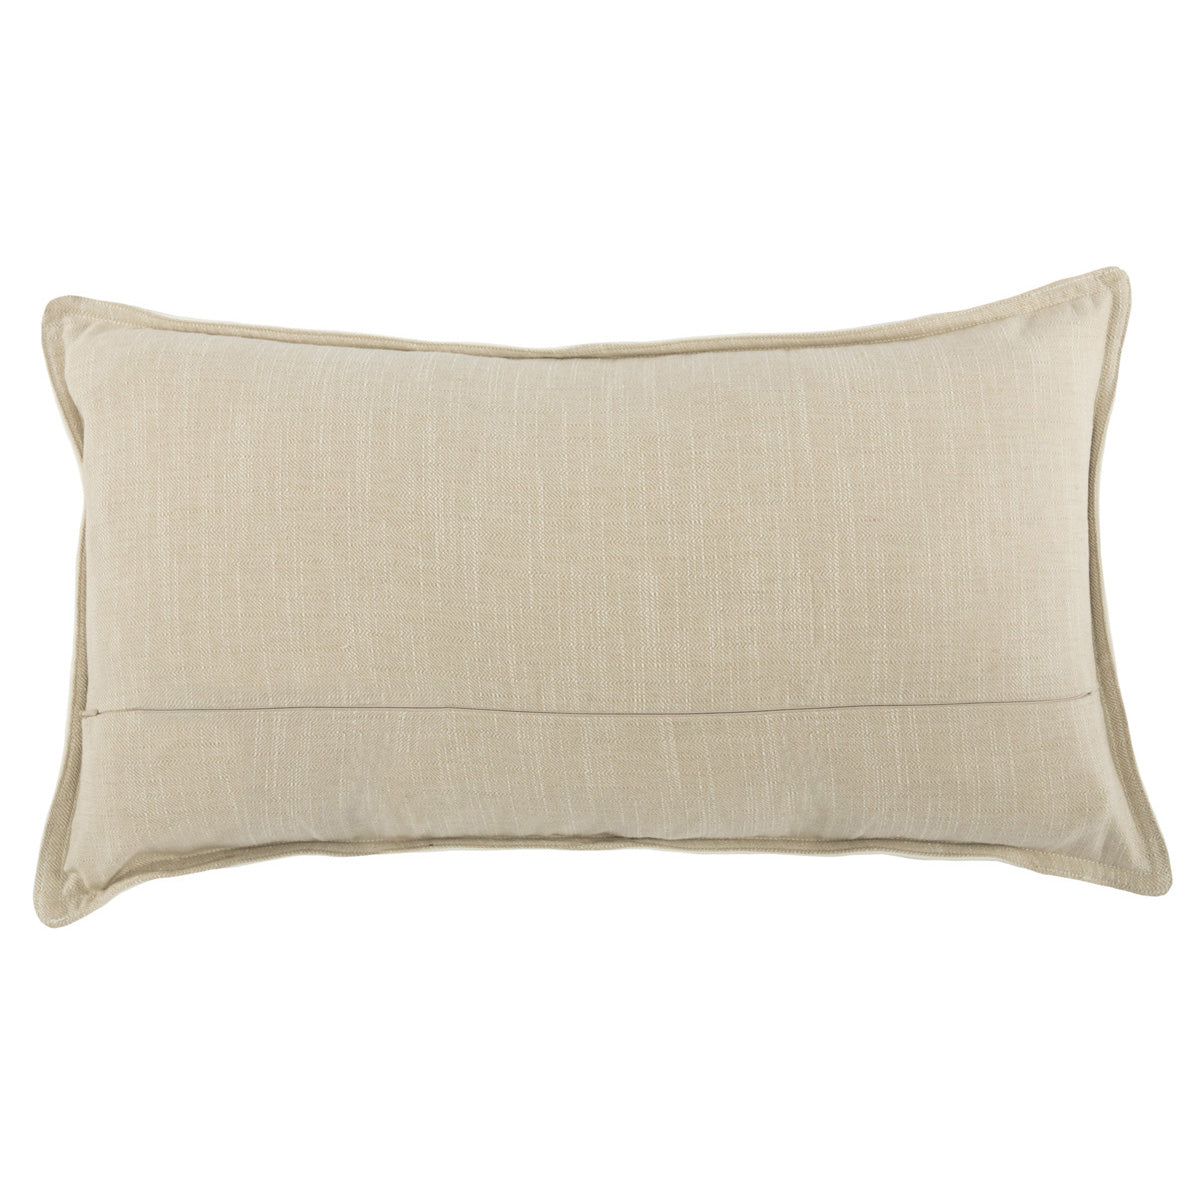 SLD Leather Davis Ivory Accent Pillow 14x26